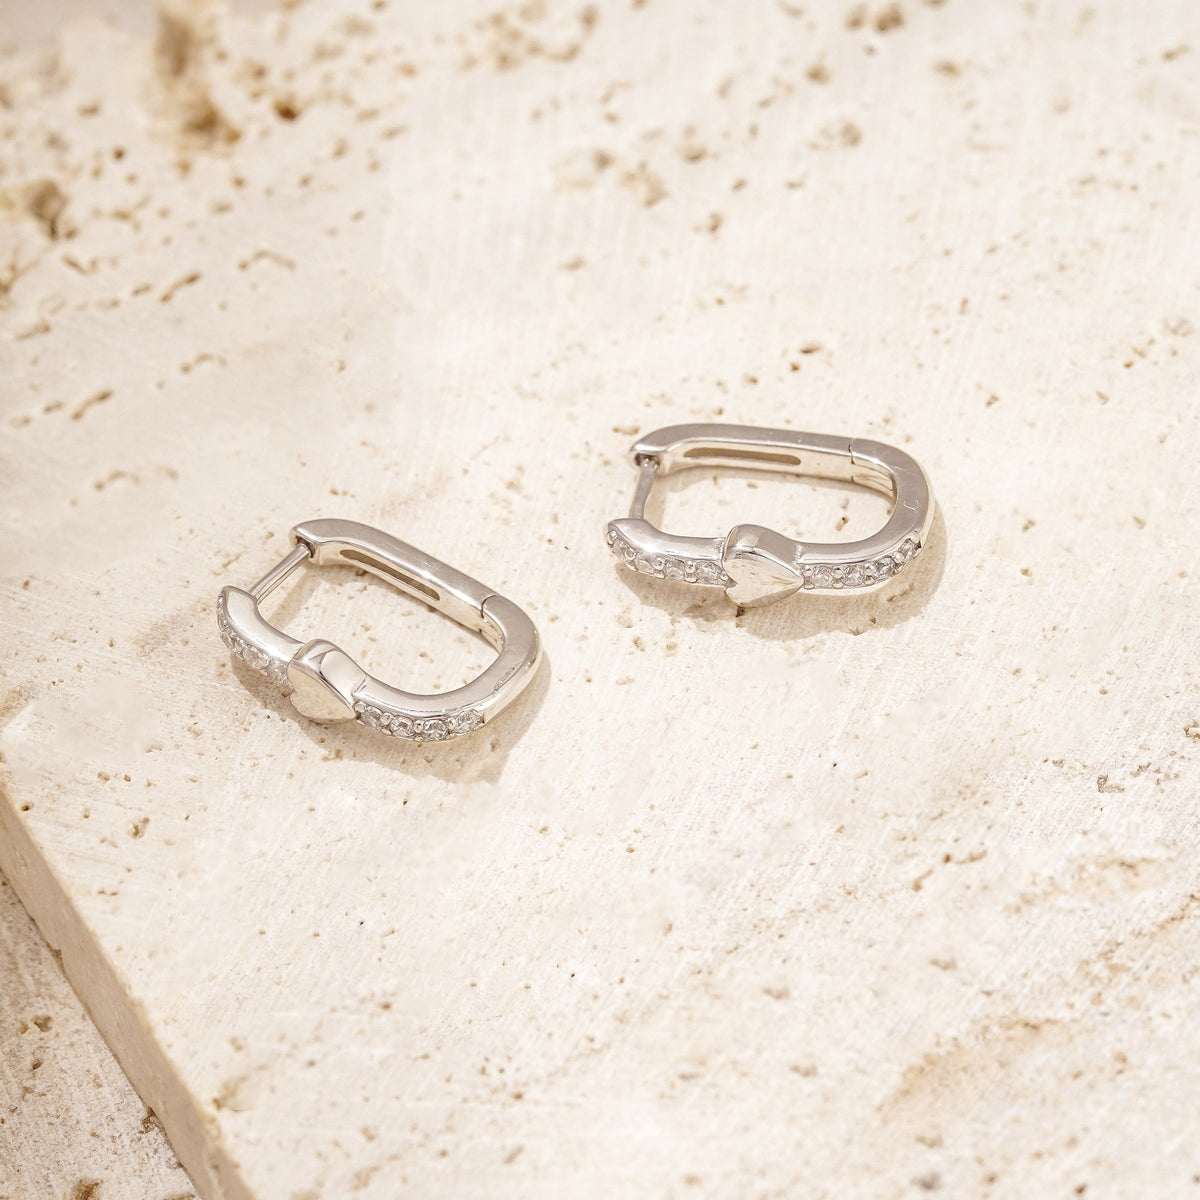 unique earrings with a dainty silver heart amid white zirconia stones. These hoop earrings have a unique shape. 